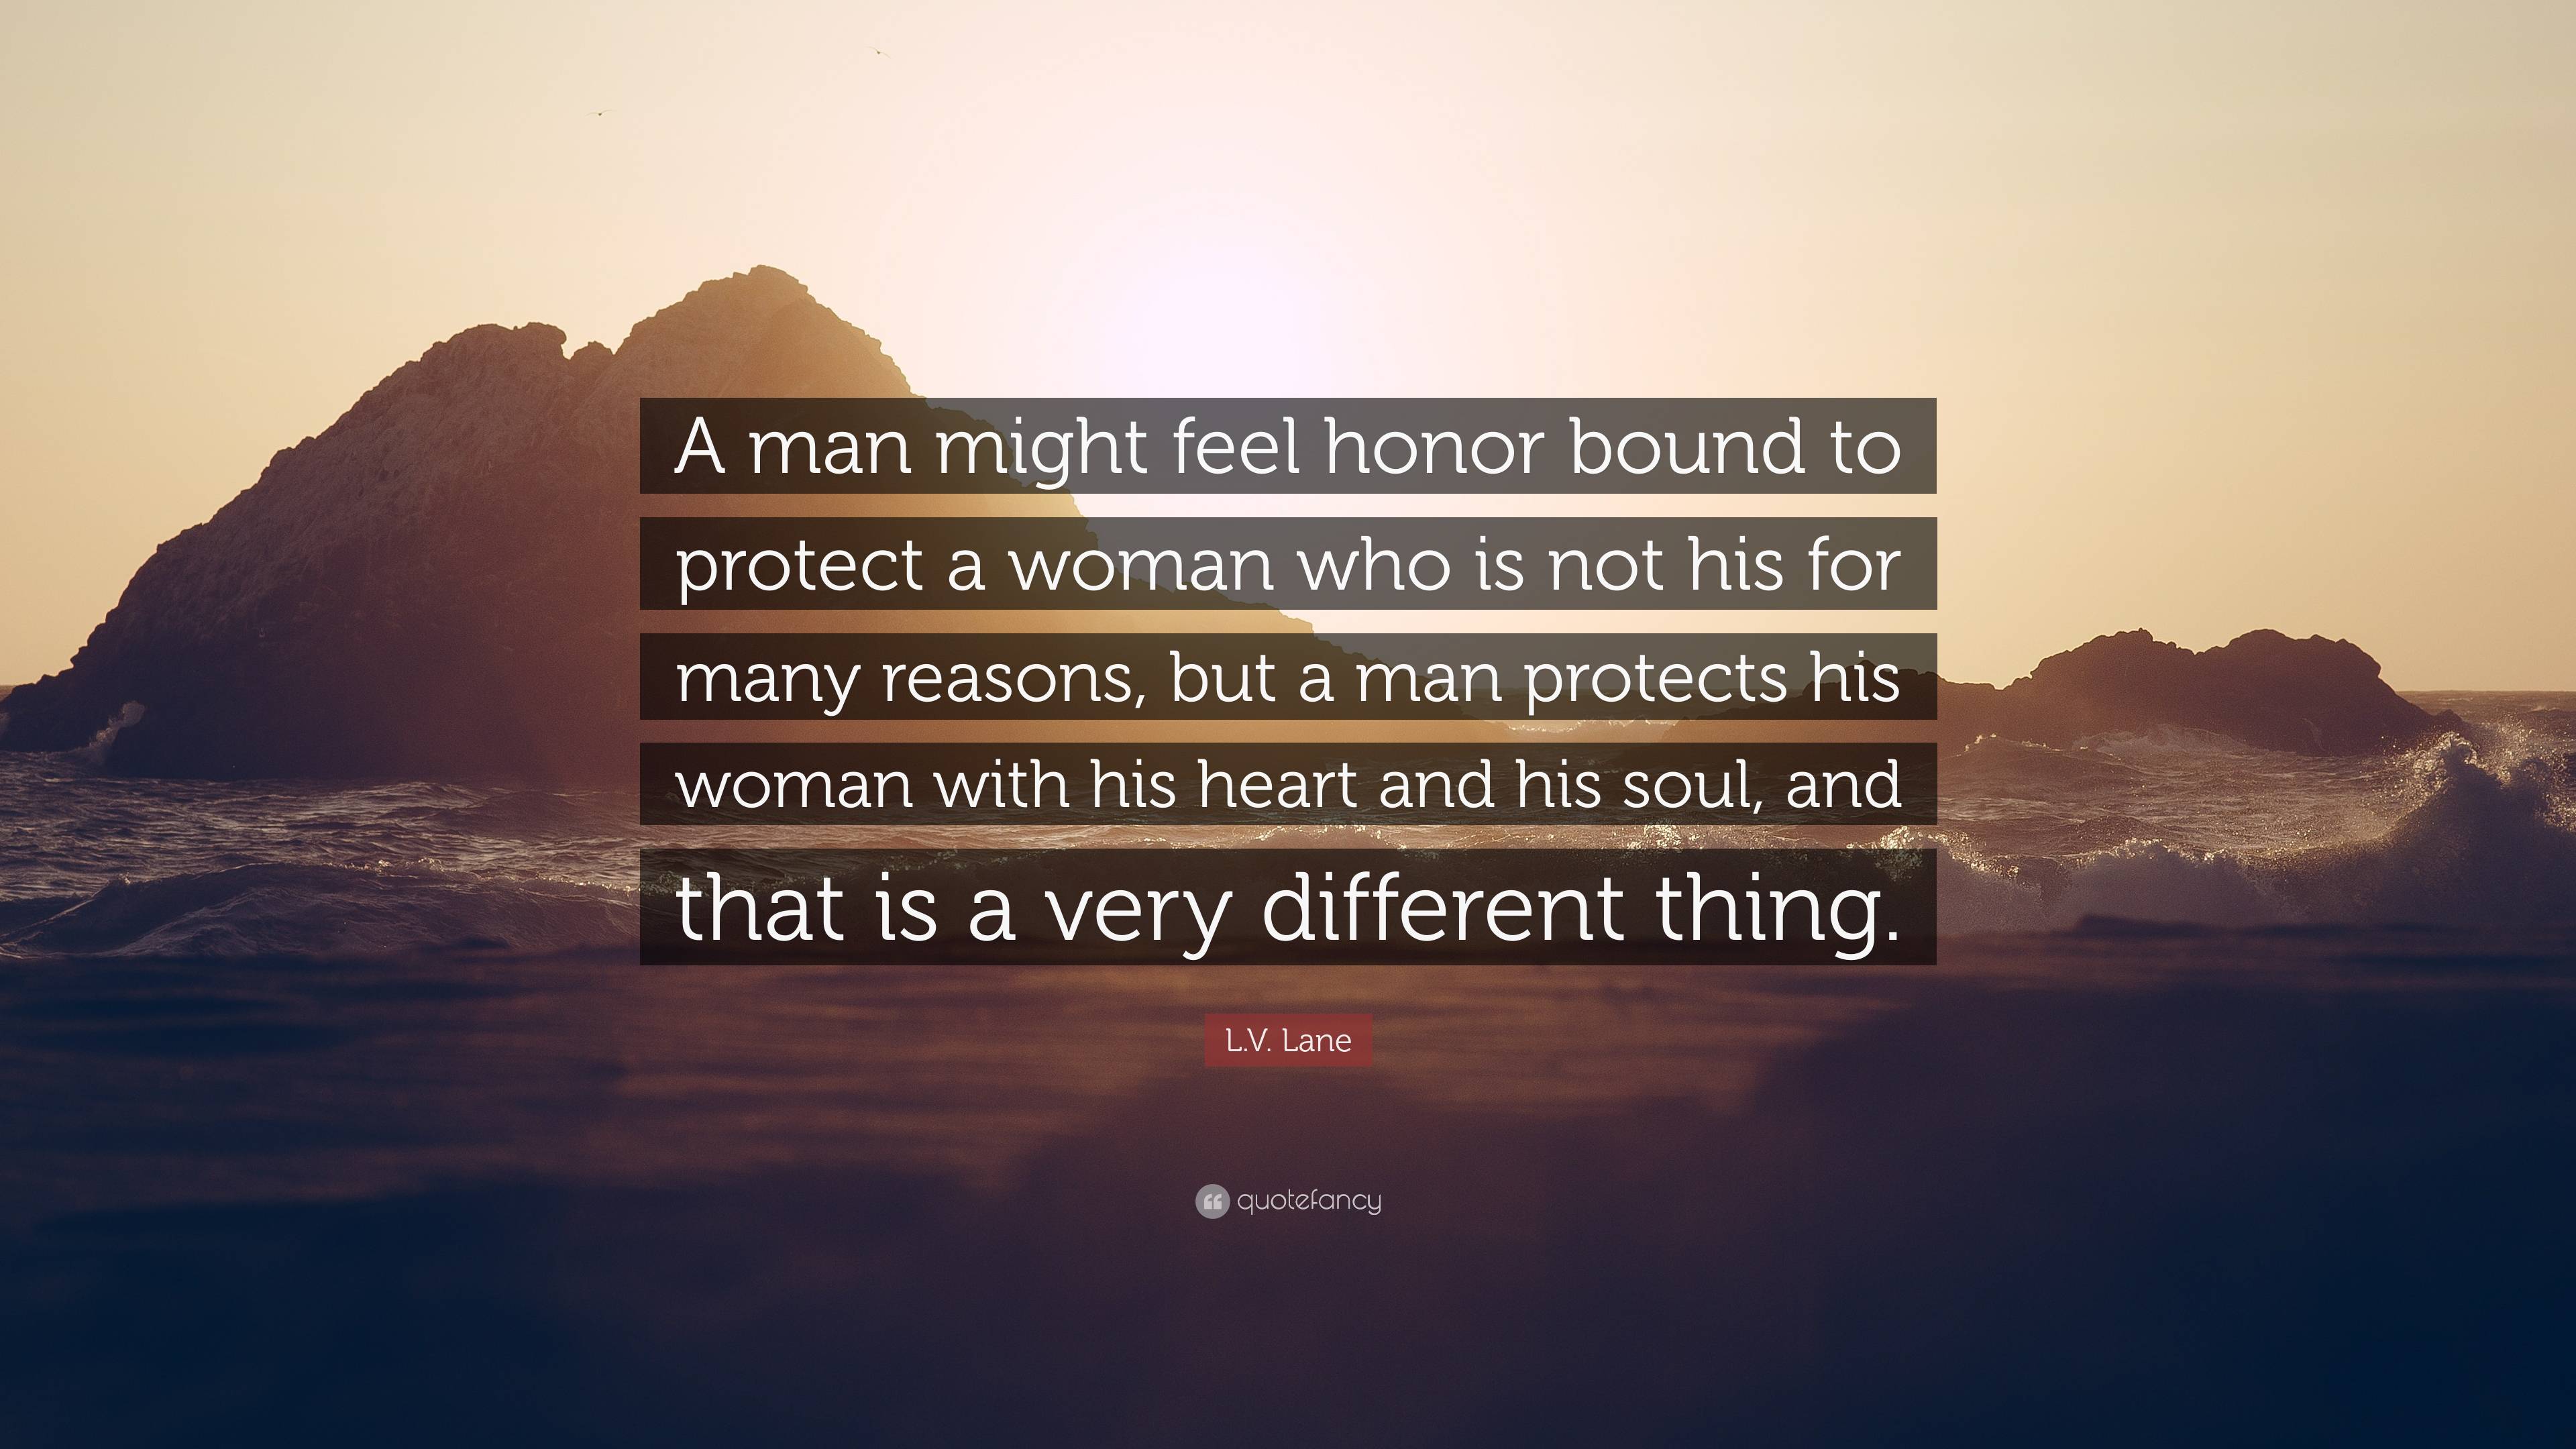 L.V. Lane Quote: “A man might feel honor bound to protect a woman who is  not his for many reasons, but a man protects his woman with his h”